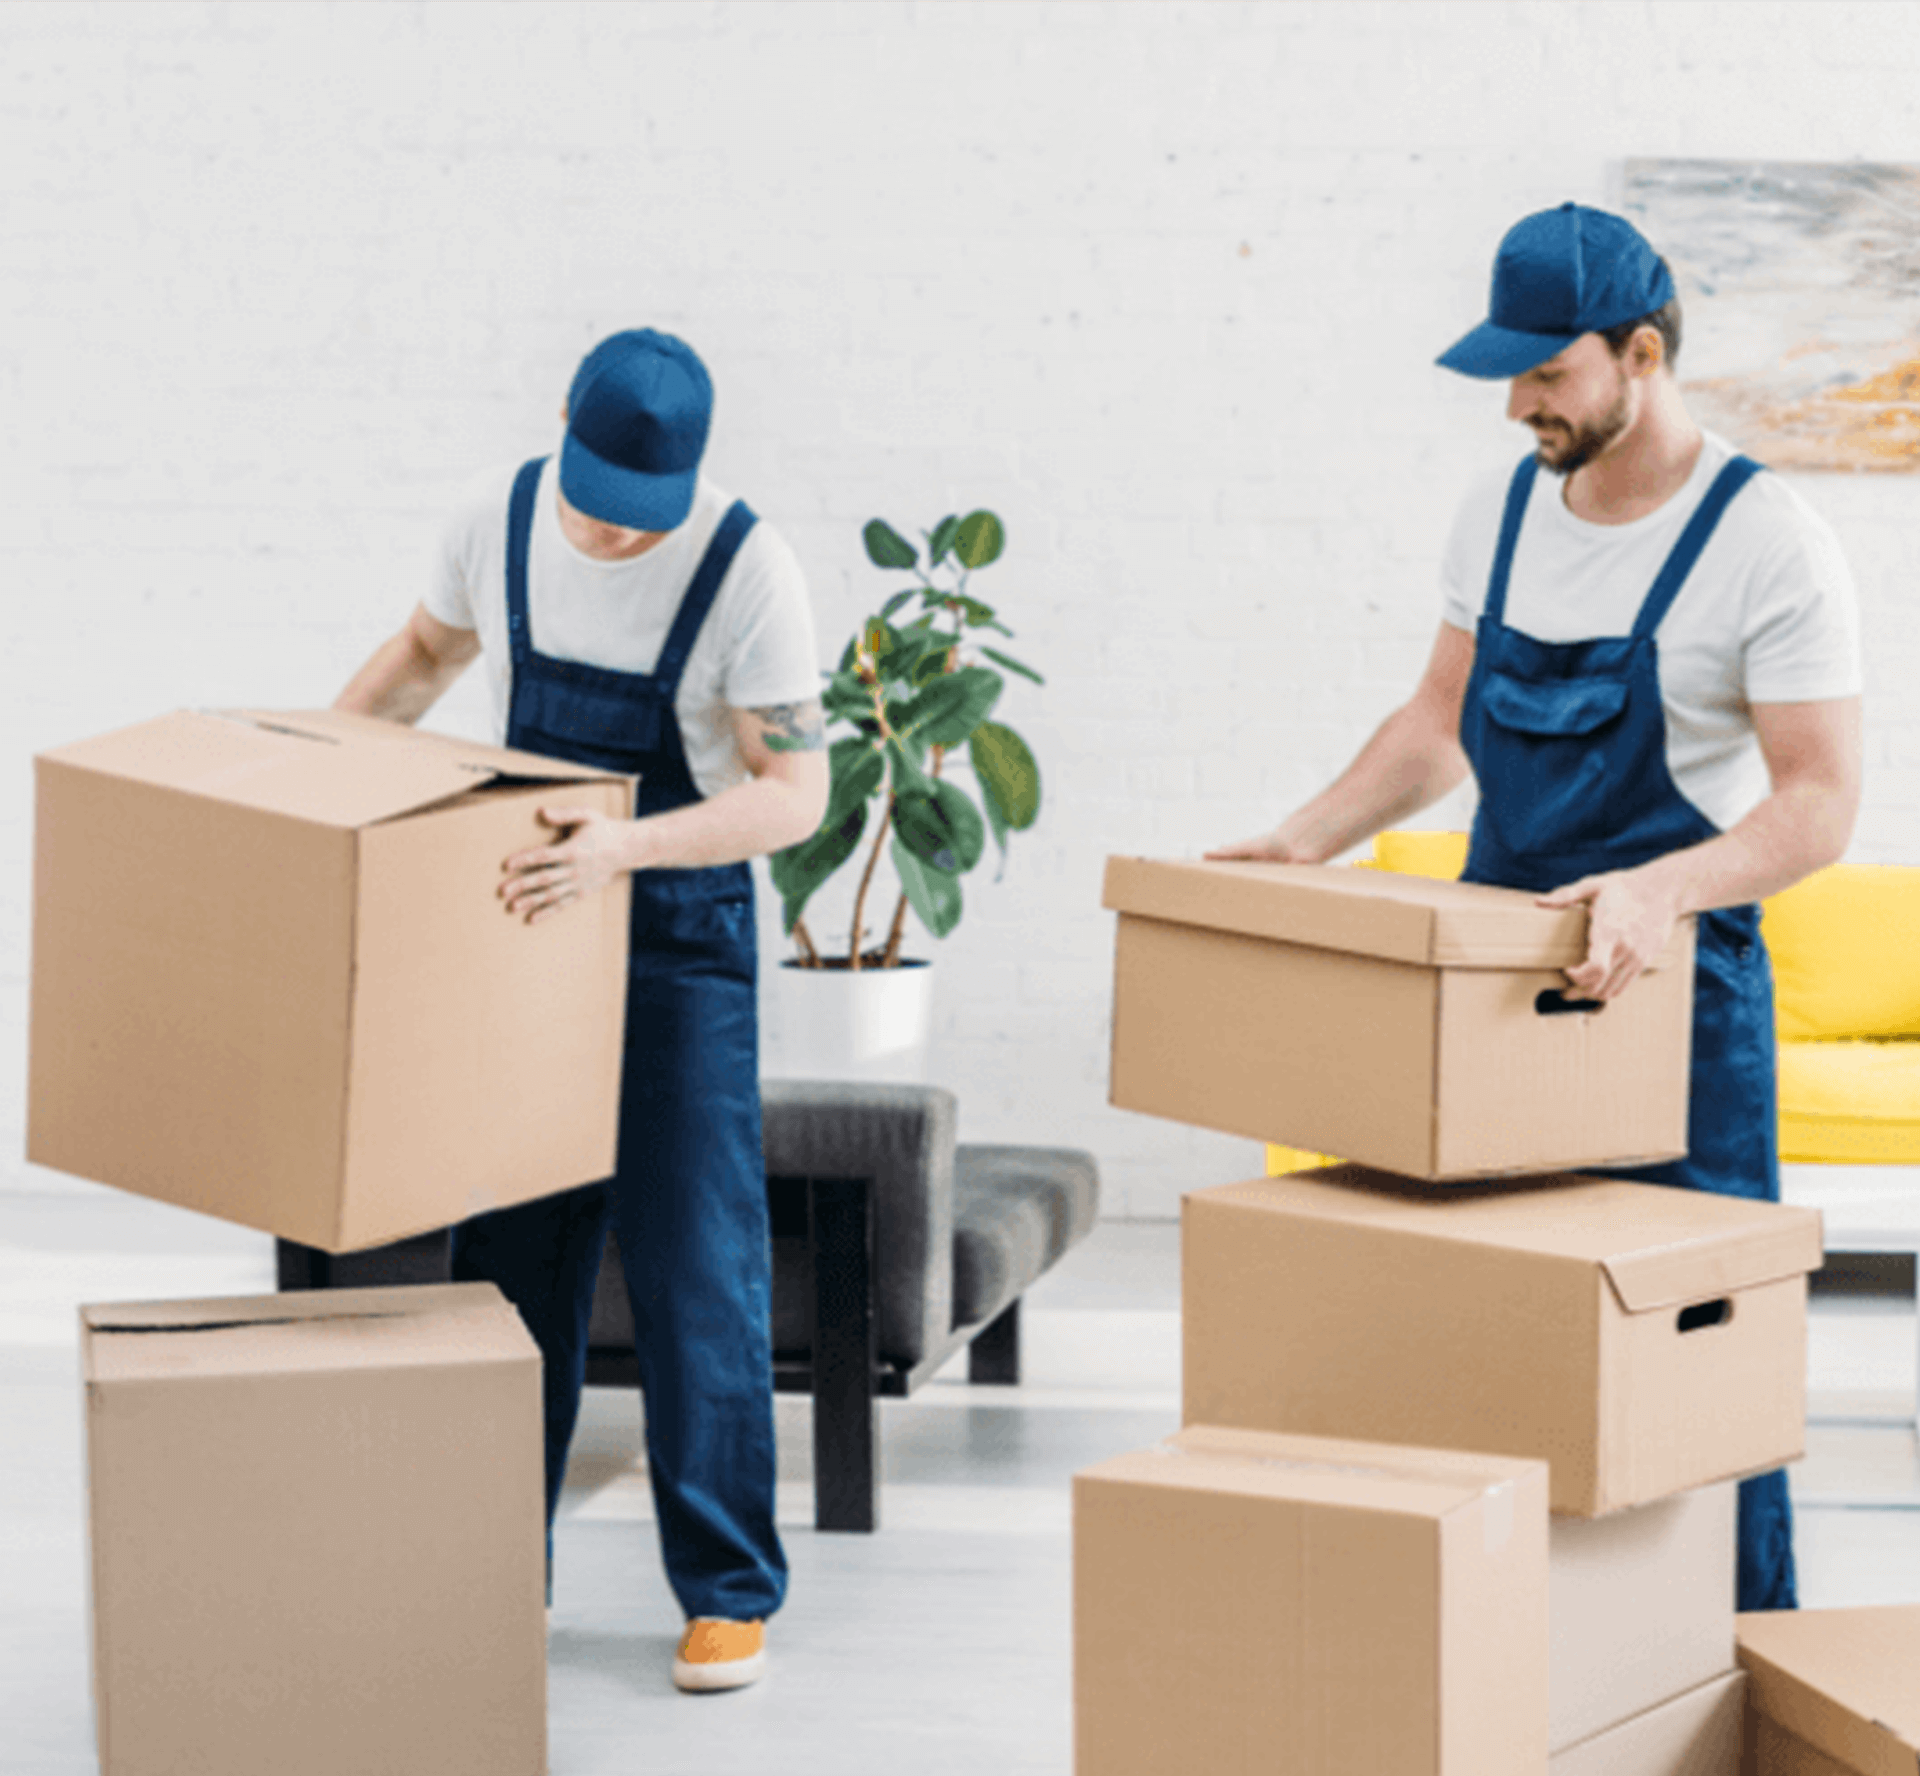 Two professional movers in matching uniforms carefully transport cardboard boxes through a modern and stylish apartment.